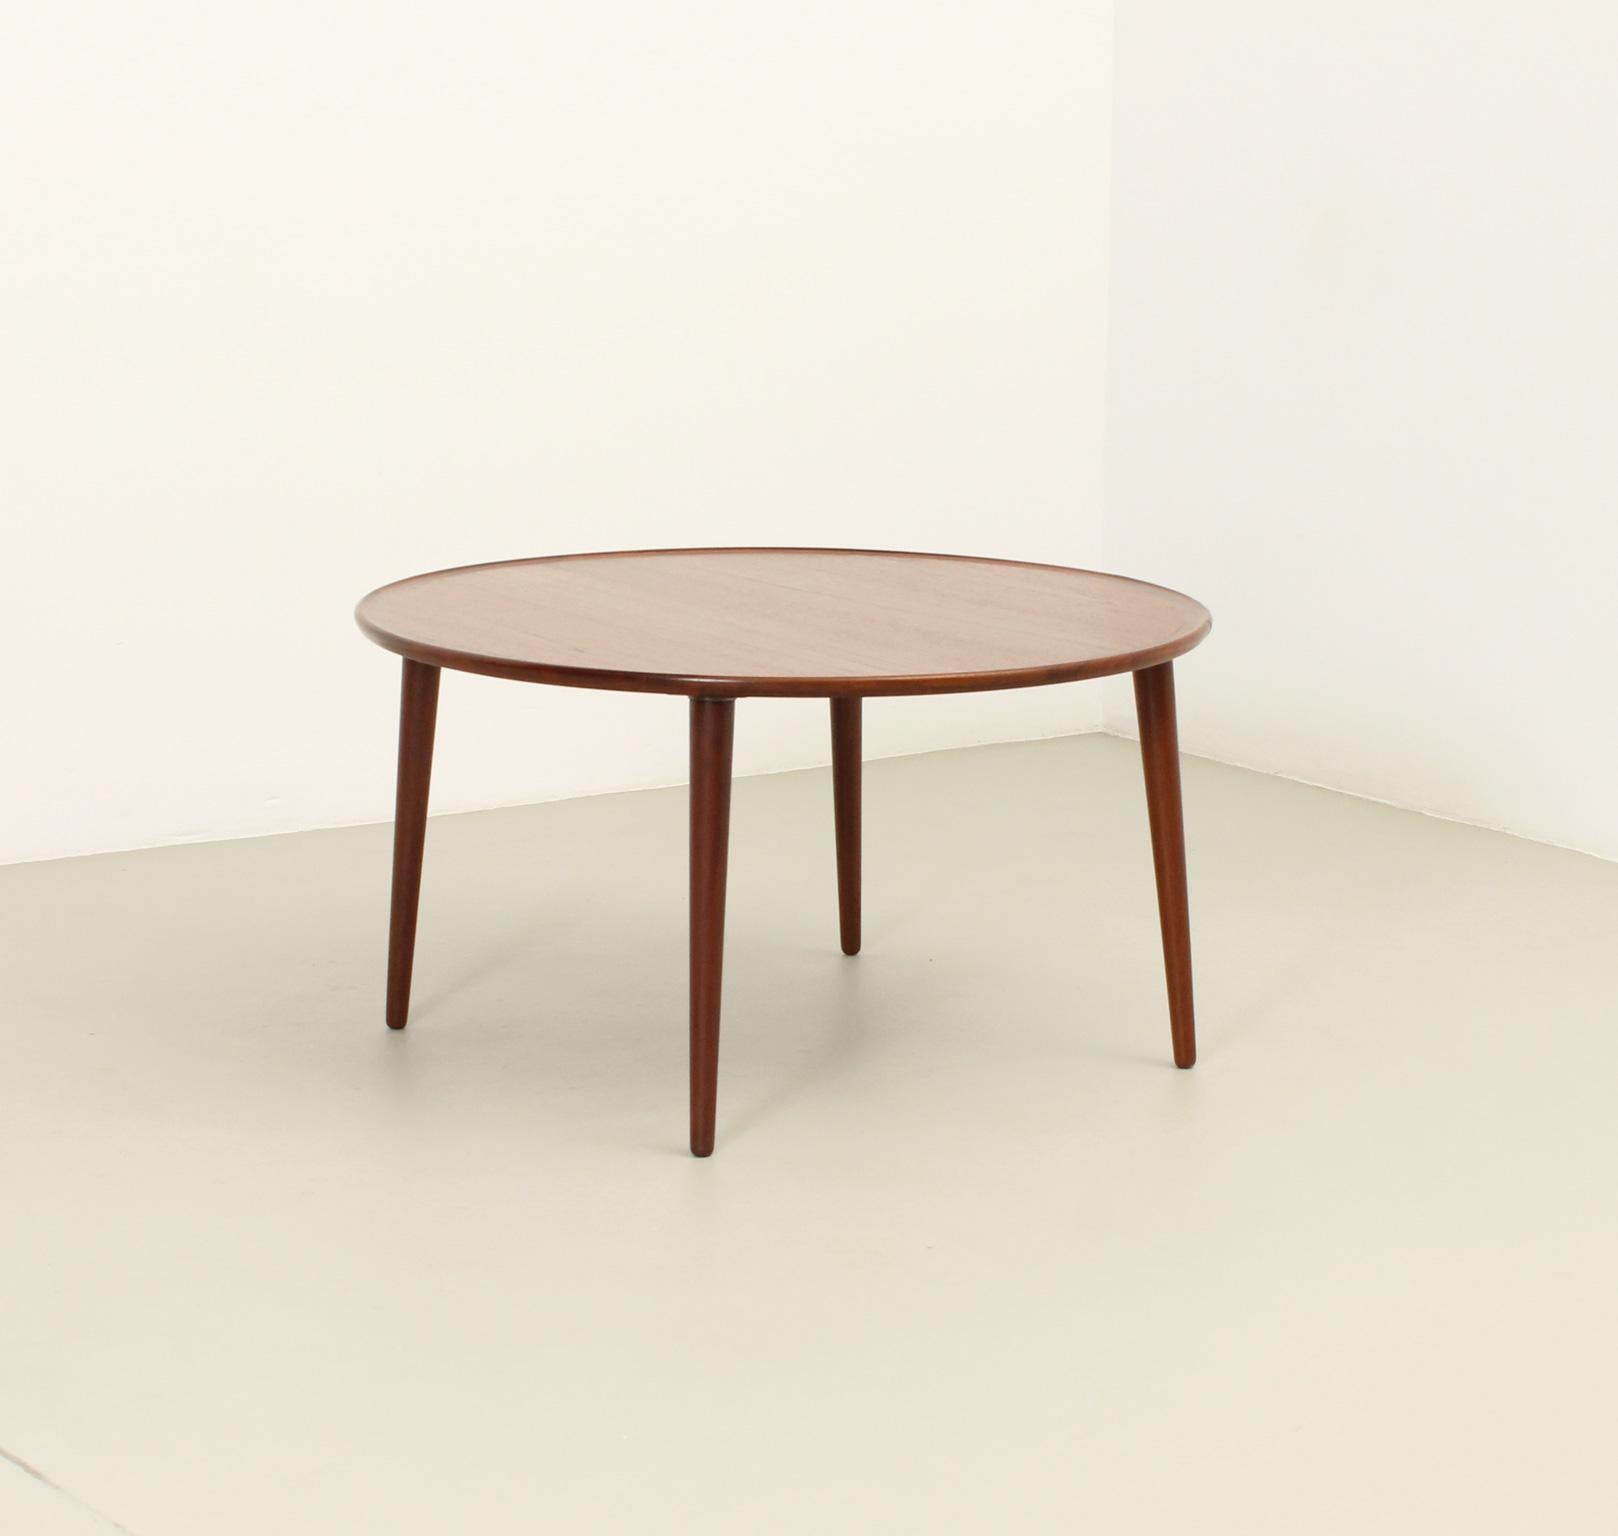 Mid-20th Century Round Coffee Table in Teak Wood by BC Møbler, Denmark, 1960's For Sale